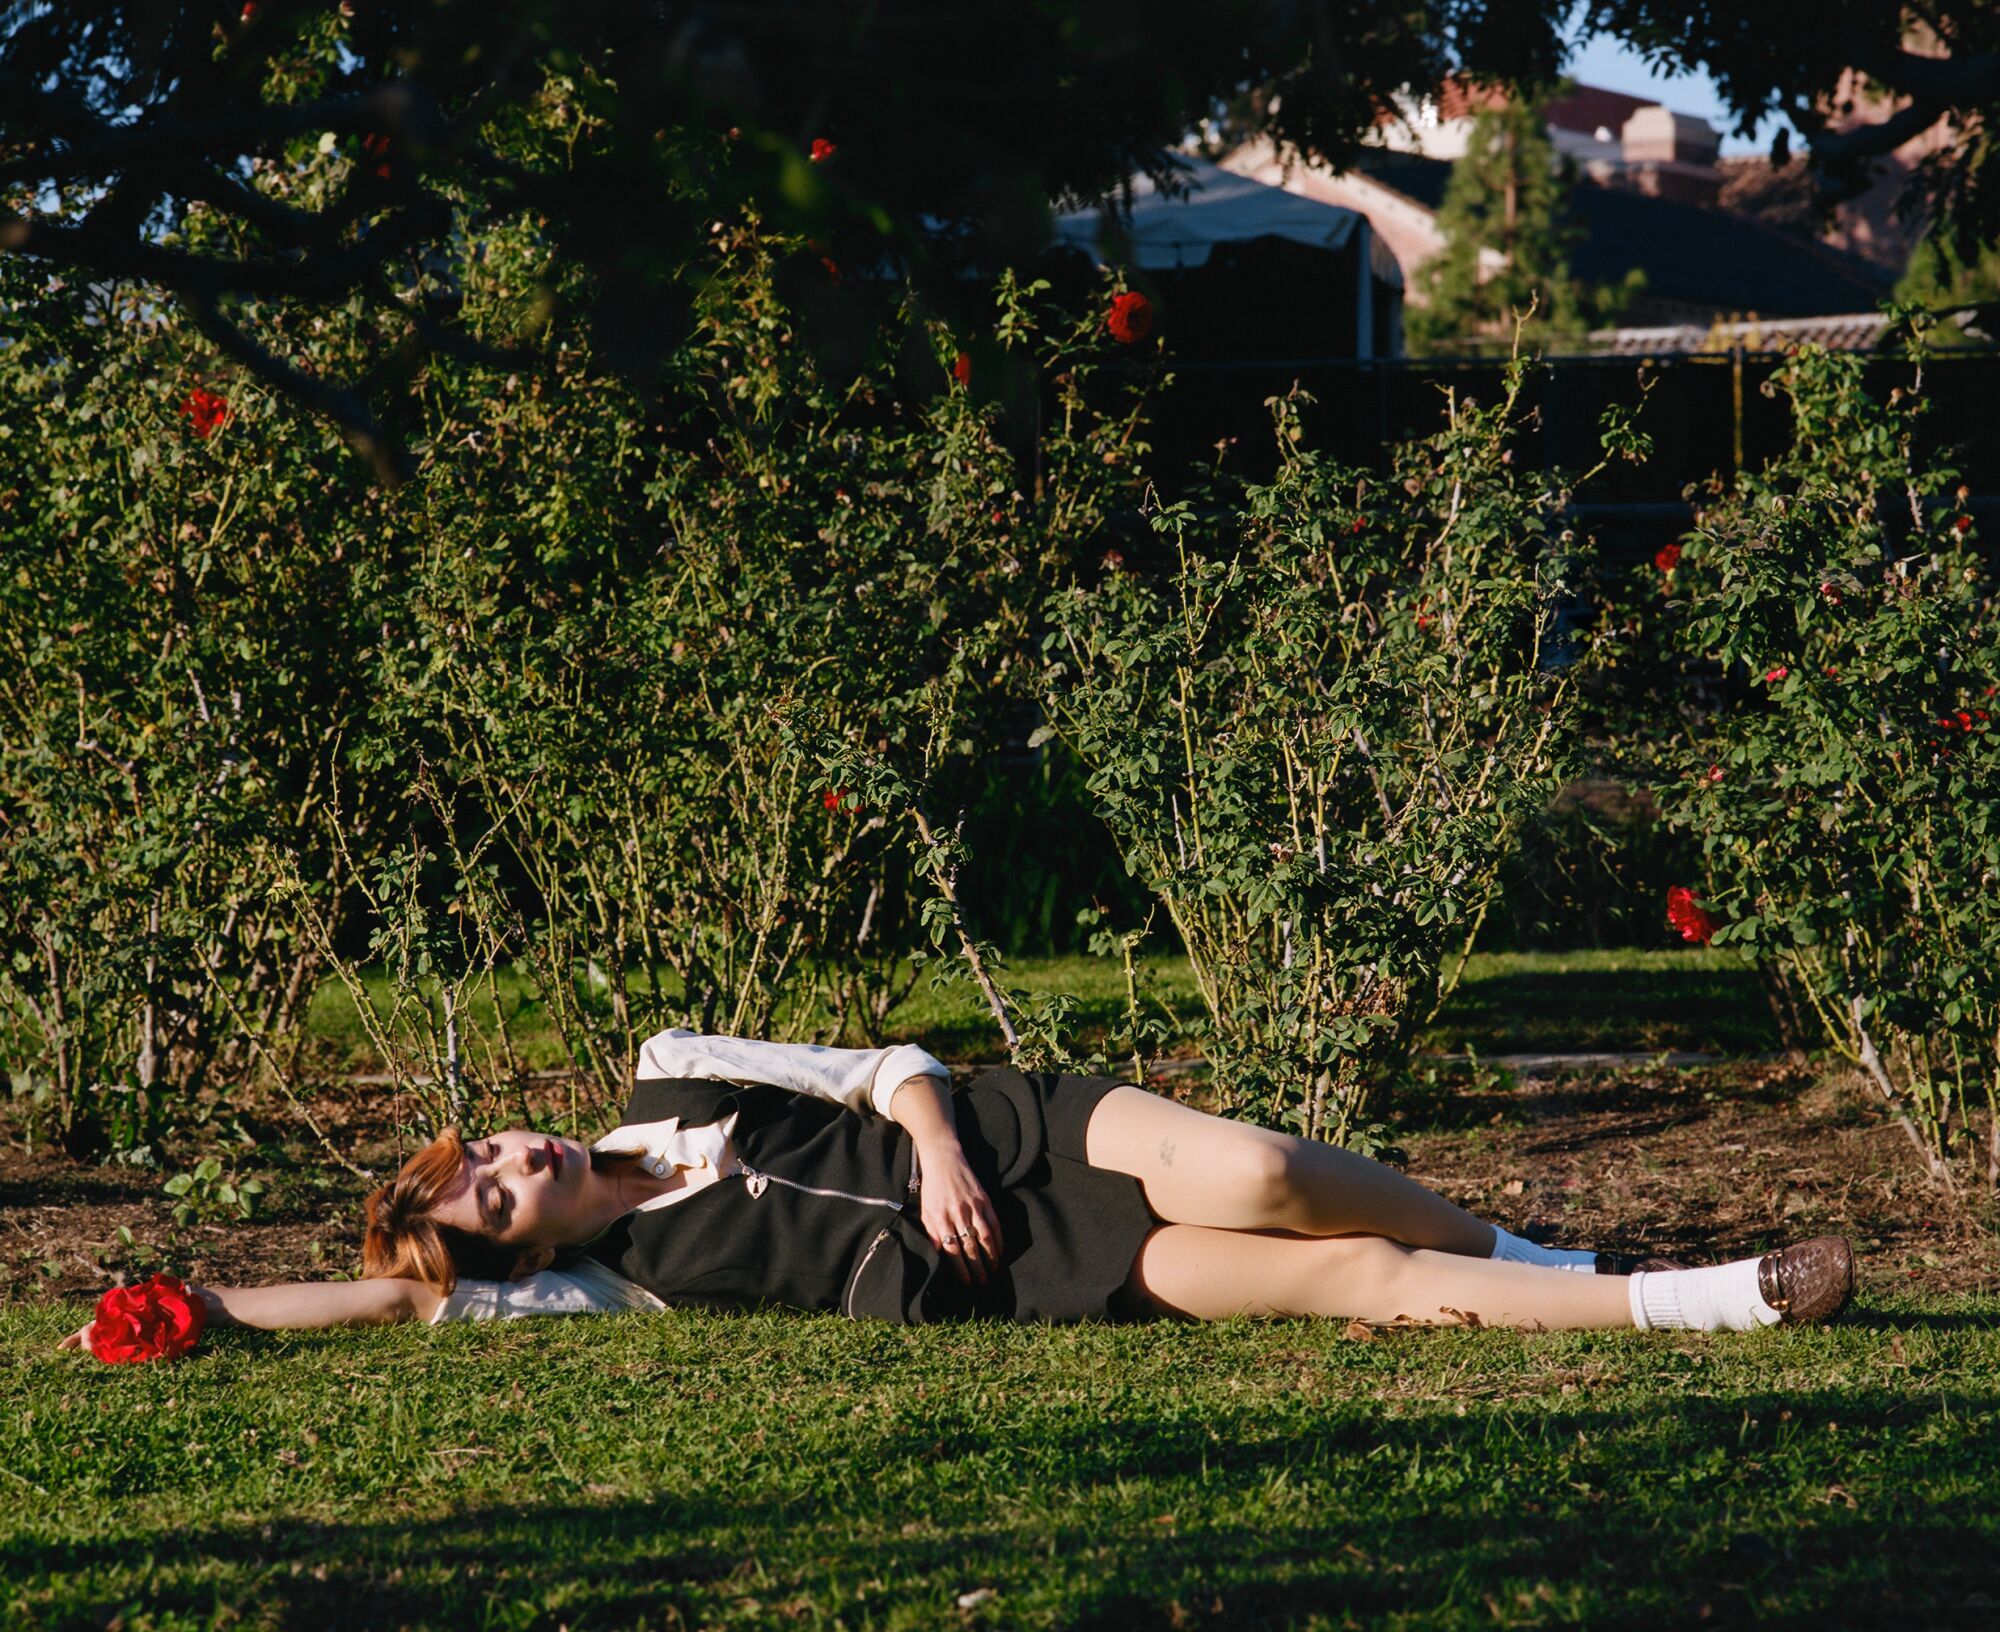 Hernández laying on the grass in Exposition Park, holding a red rose in her hand.